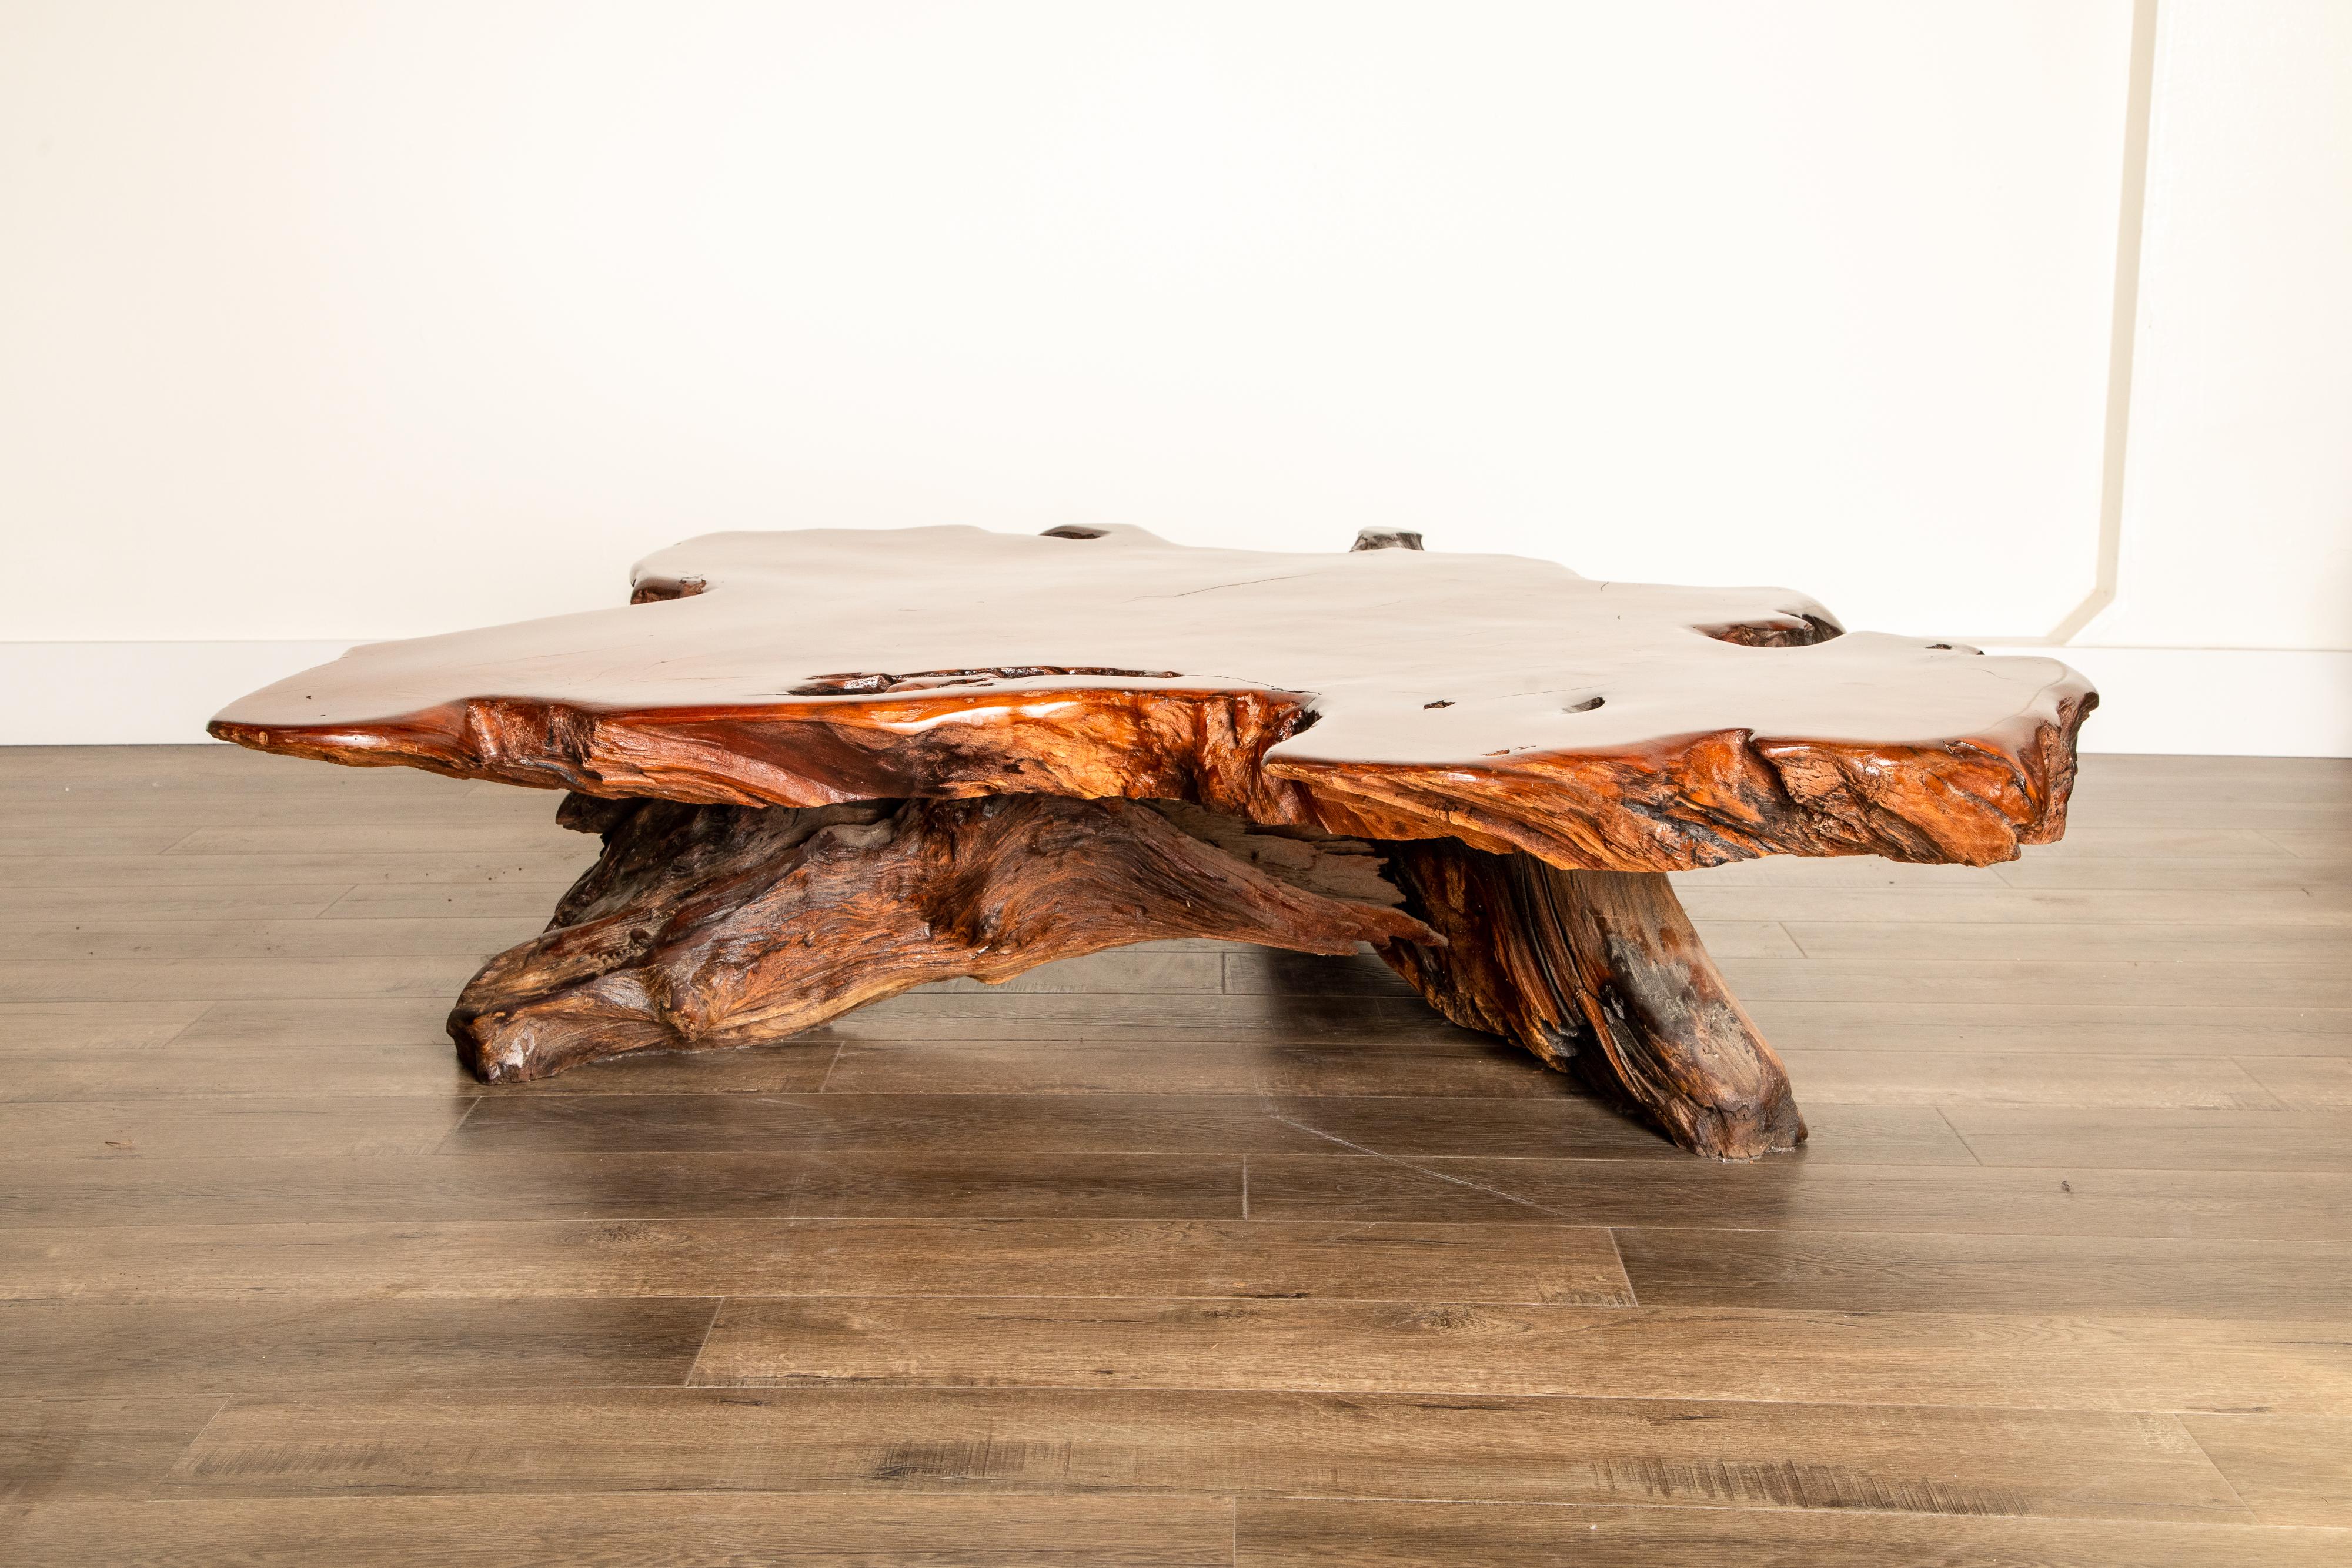 American Handcrafted Freeform Live Slab Burl Redwood Coffee Table by Daryl Stokes, 1970s